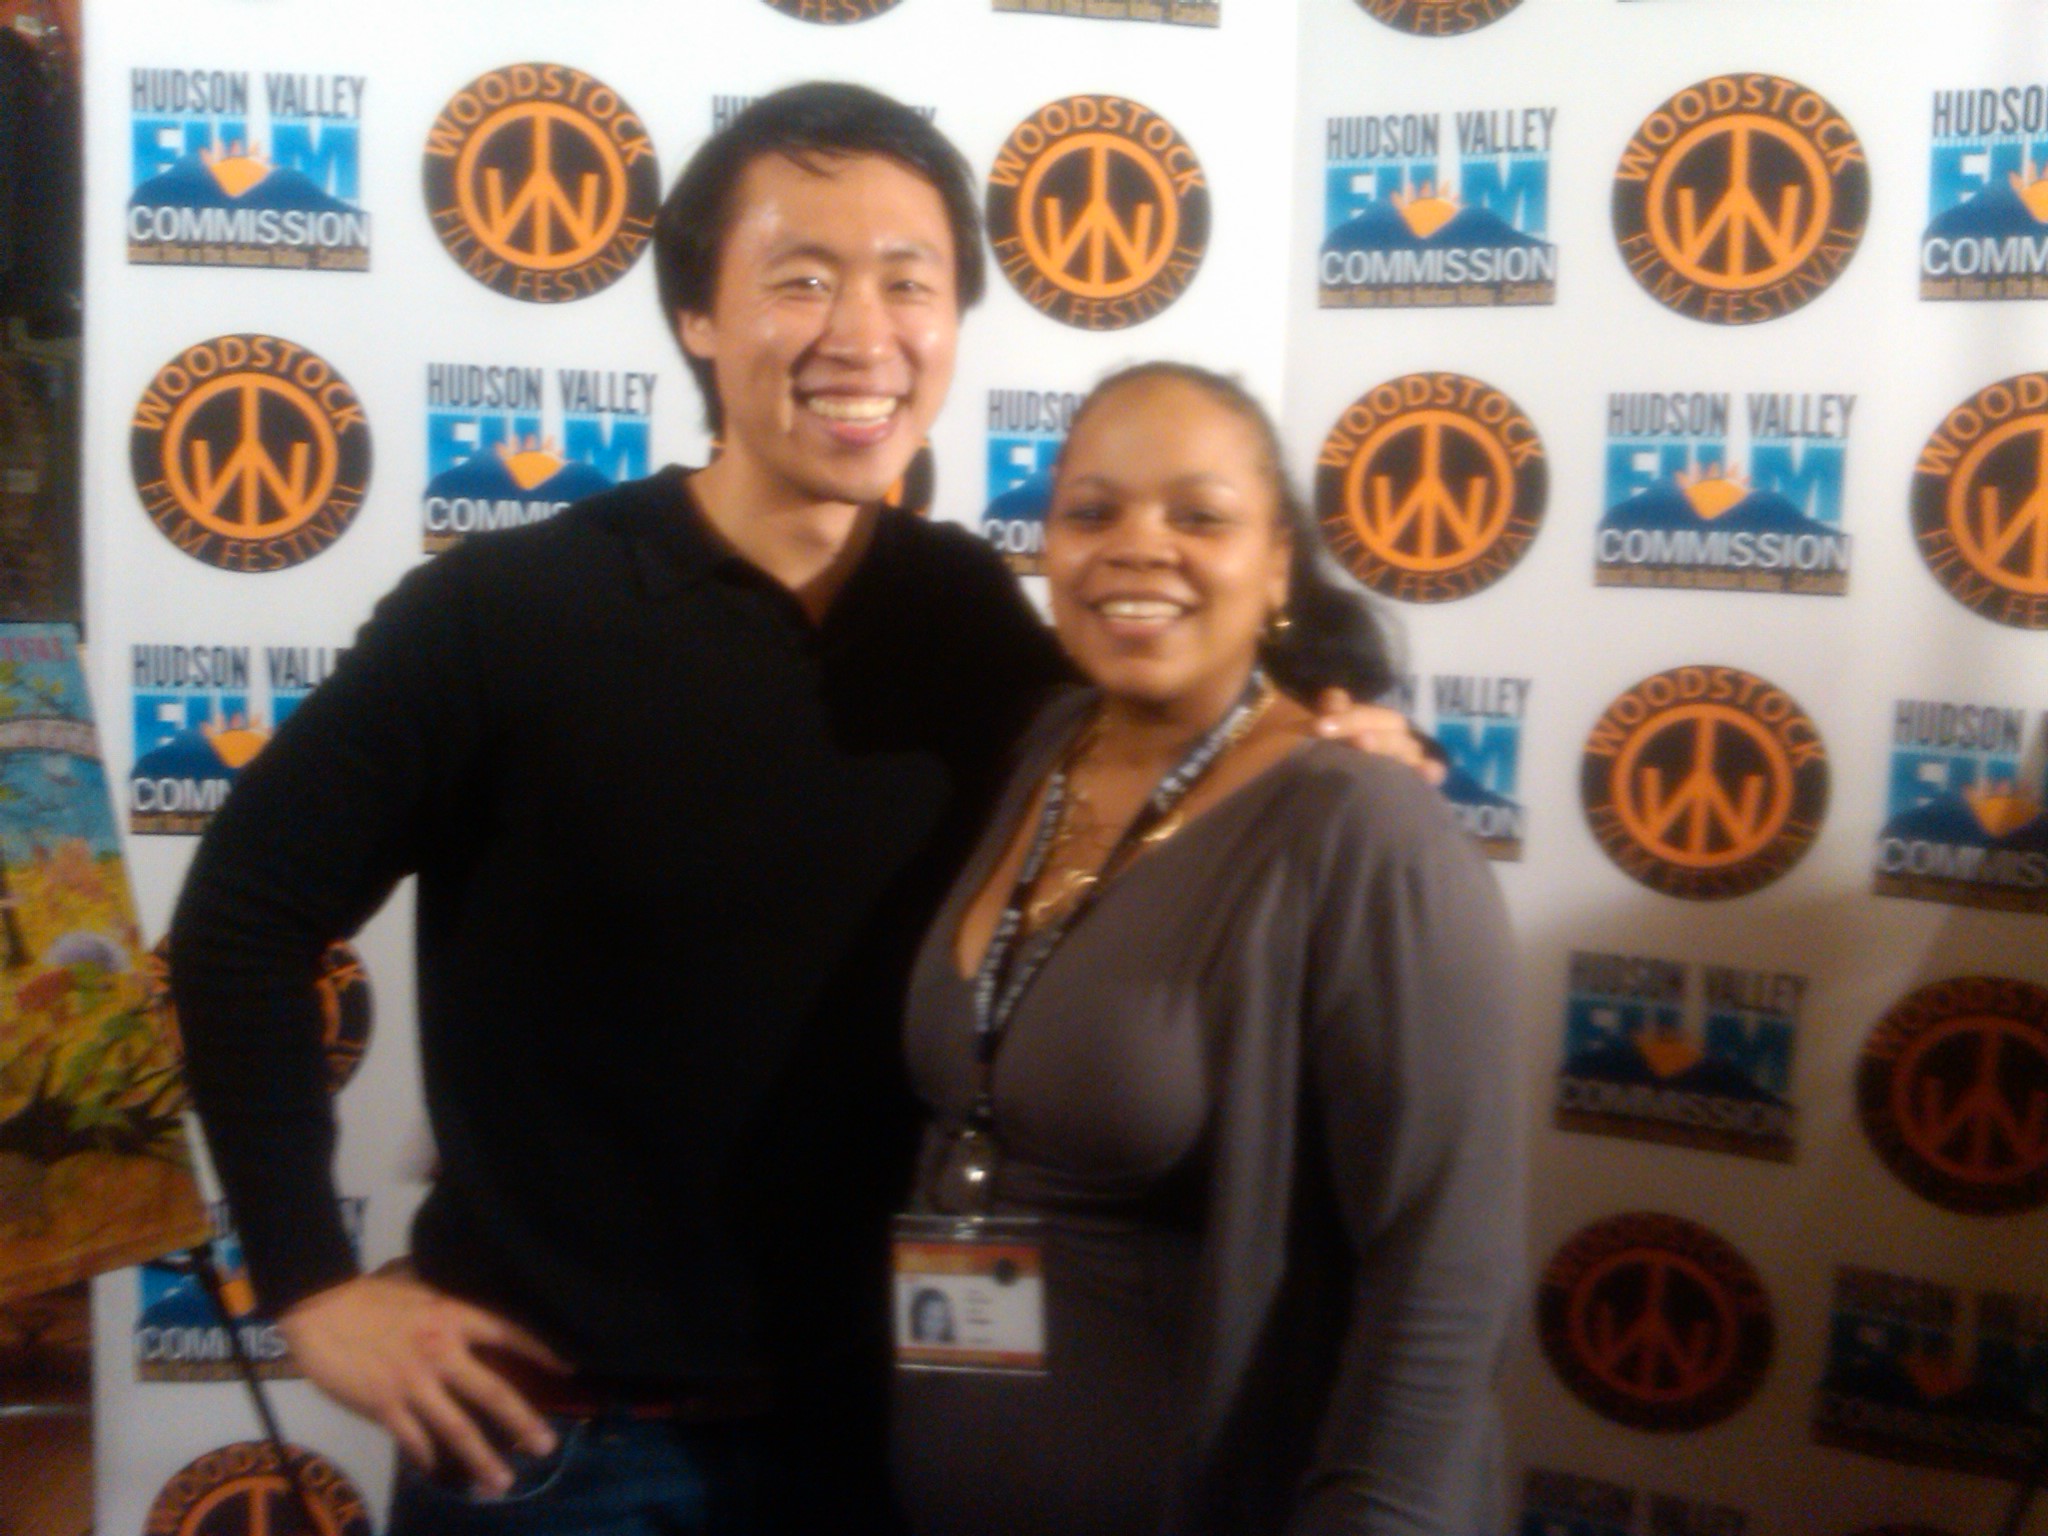 Stephen Lin and Tonye Patano at The Woodstock Film Festival